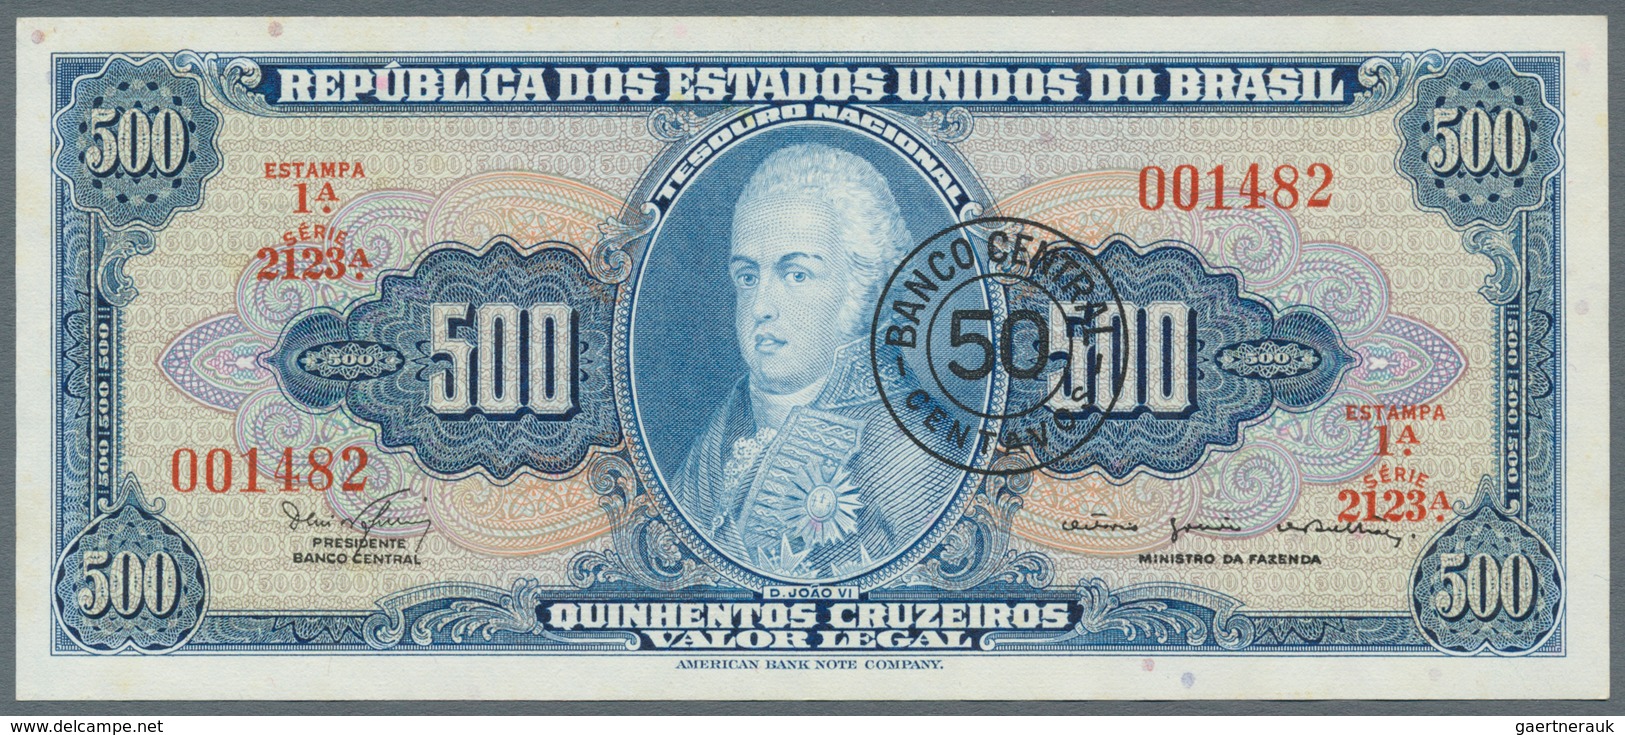 South America / Südamerika: large collection of about 700 banknotes from Asia and America as well as